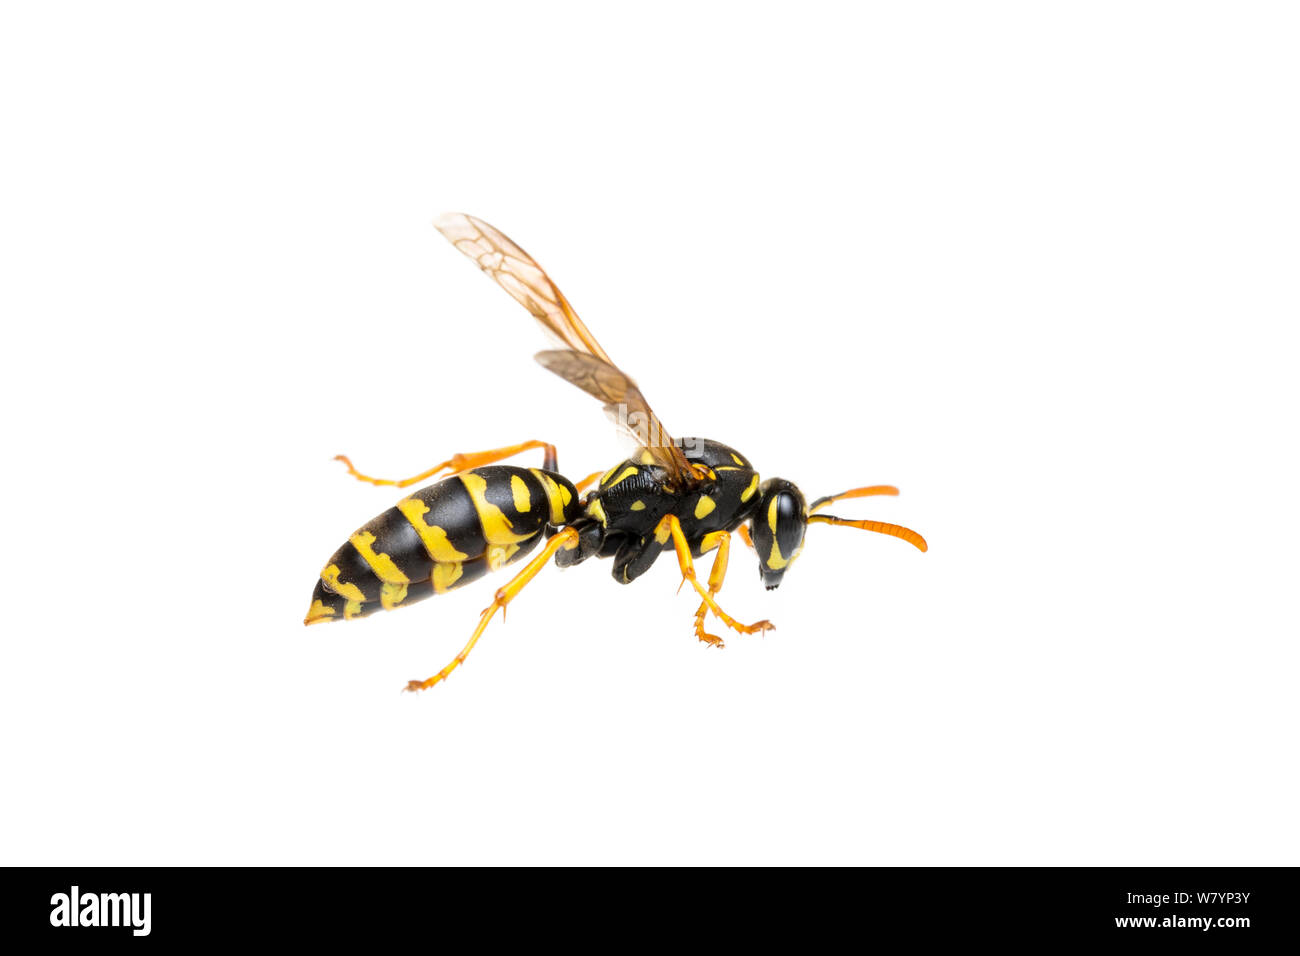 Paper wasp (Polistes gallicus), Maine-et-Loire, France, October. meetyourneighbours.net project Stock Photo